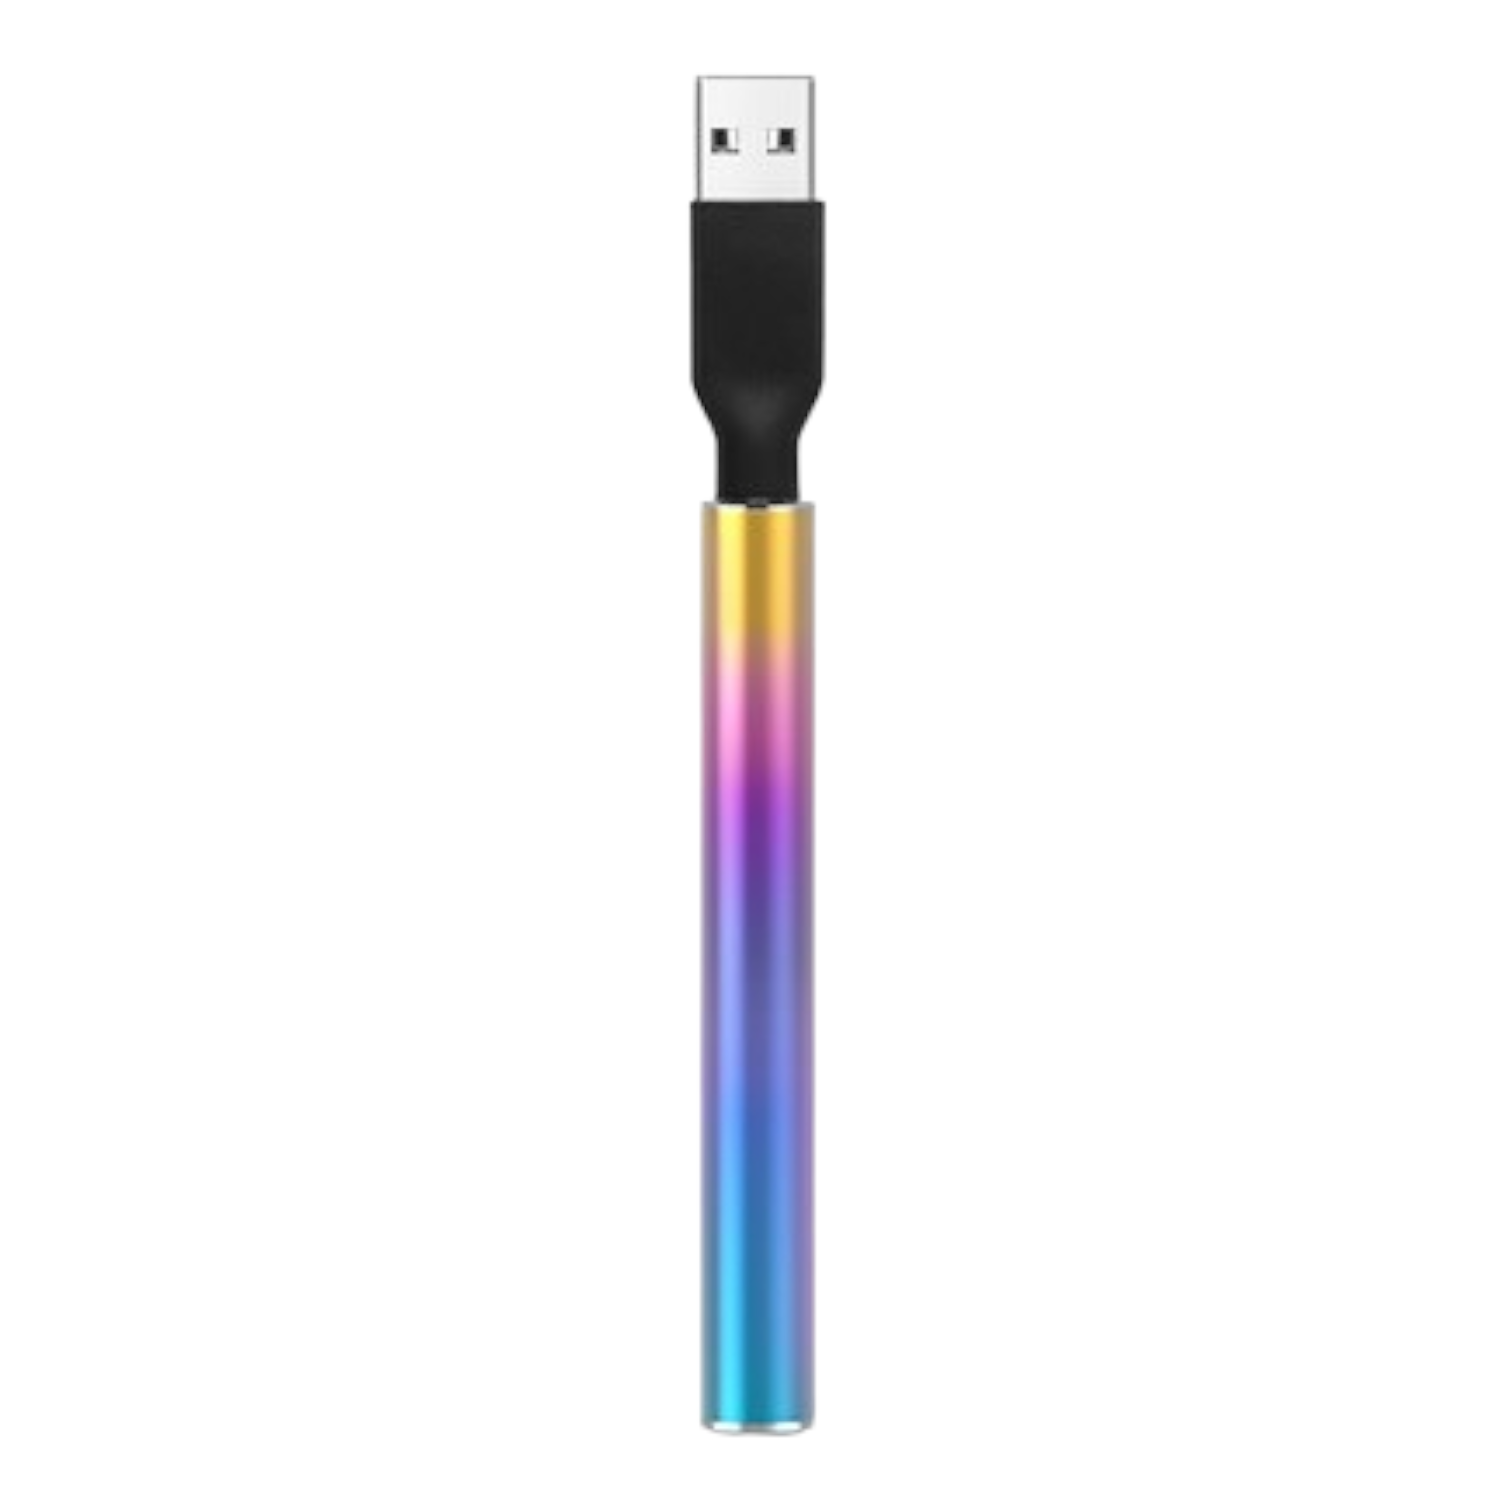 CCELL - Rainbow Stick Battery and Charger